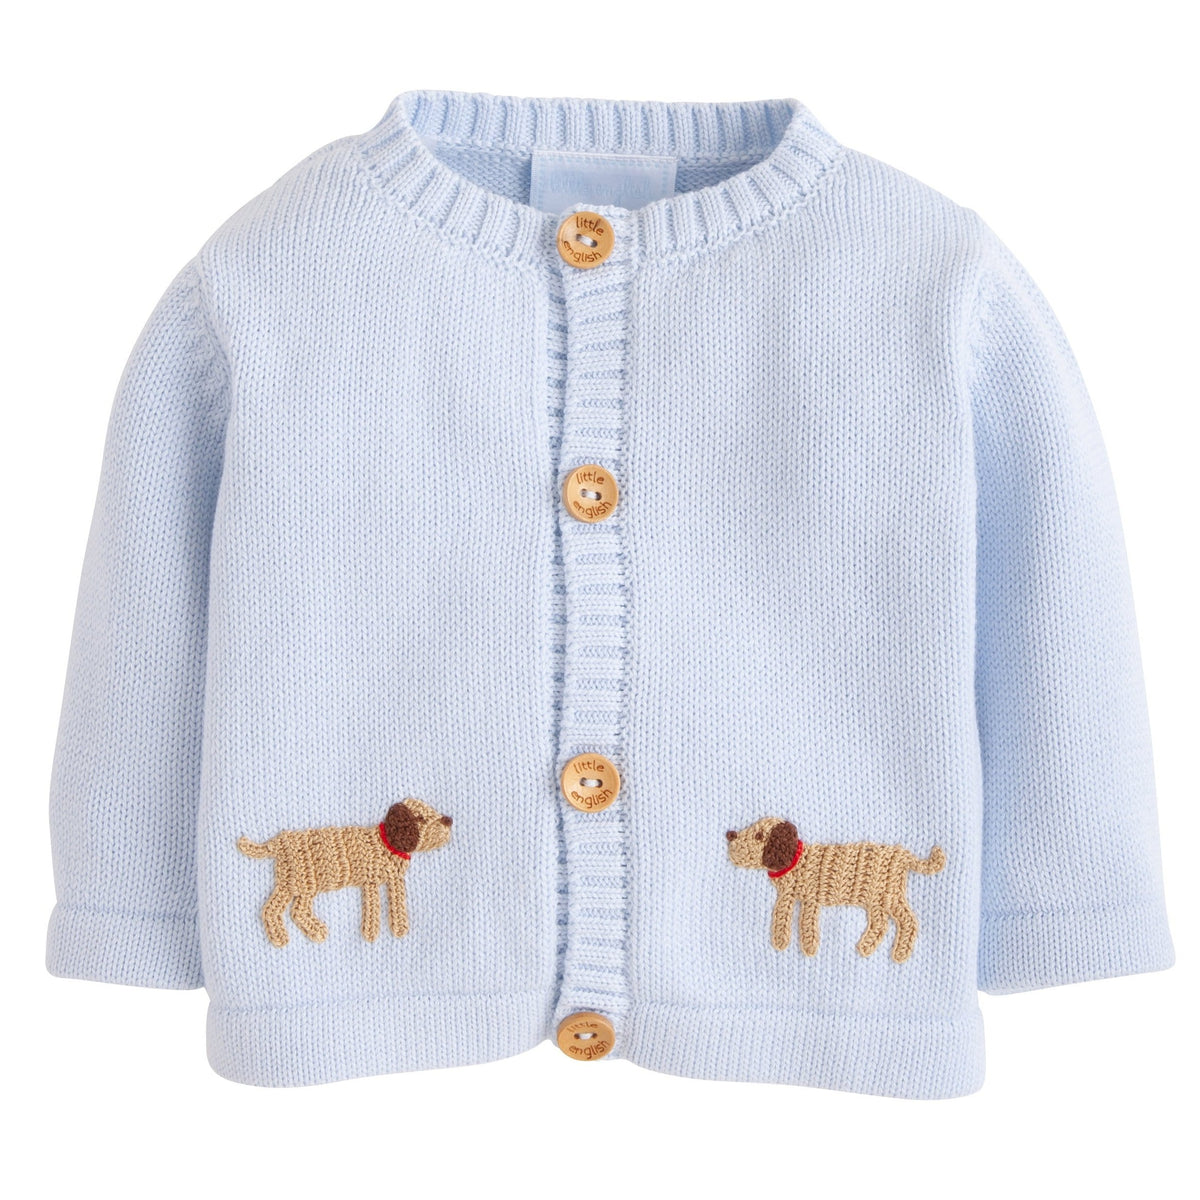 seguridadindustrialcr traditional baby clothing, signature crochet sweater with lab for baby boy